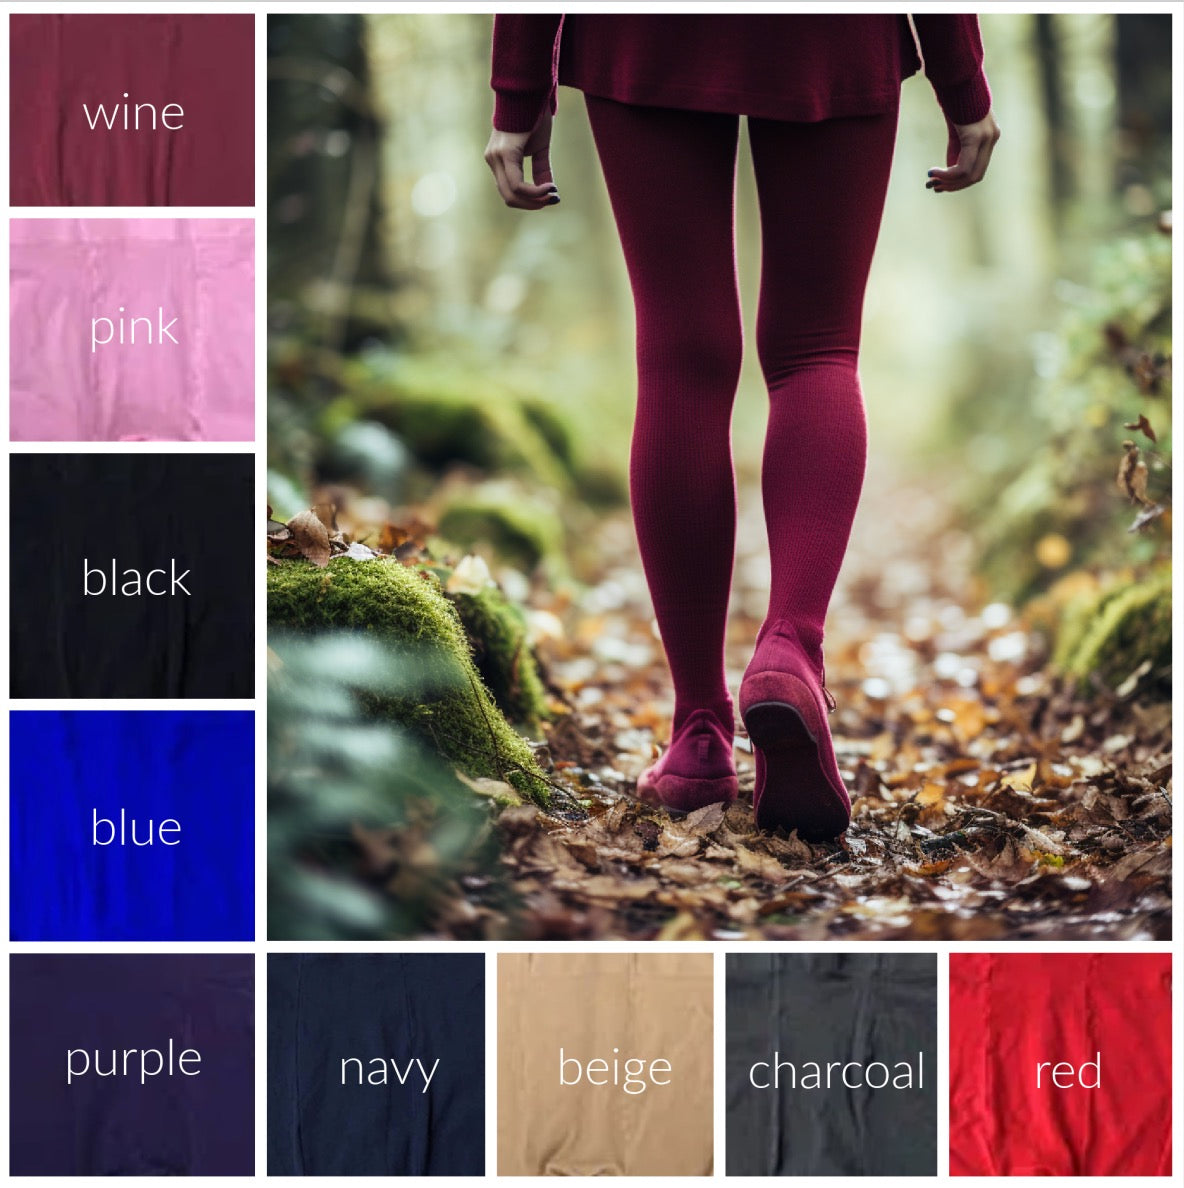 Full coverage women's tights | Handmade in Canada stockings